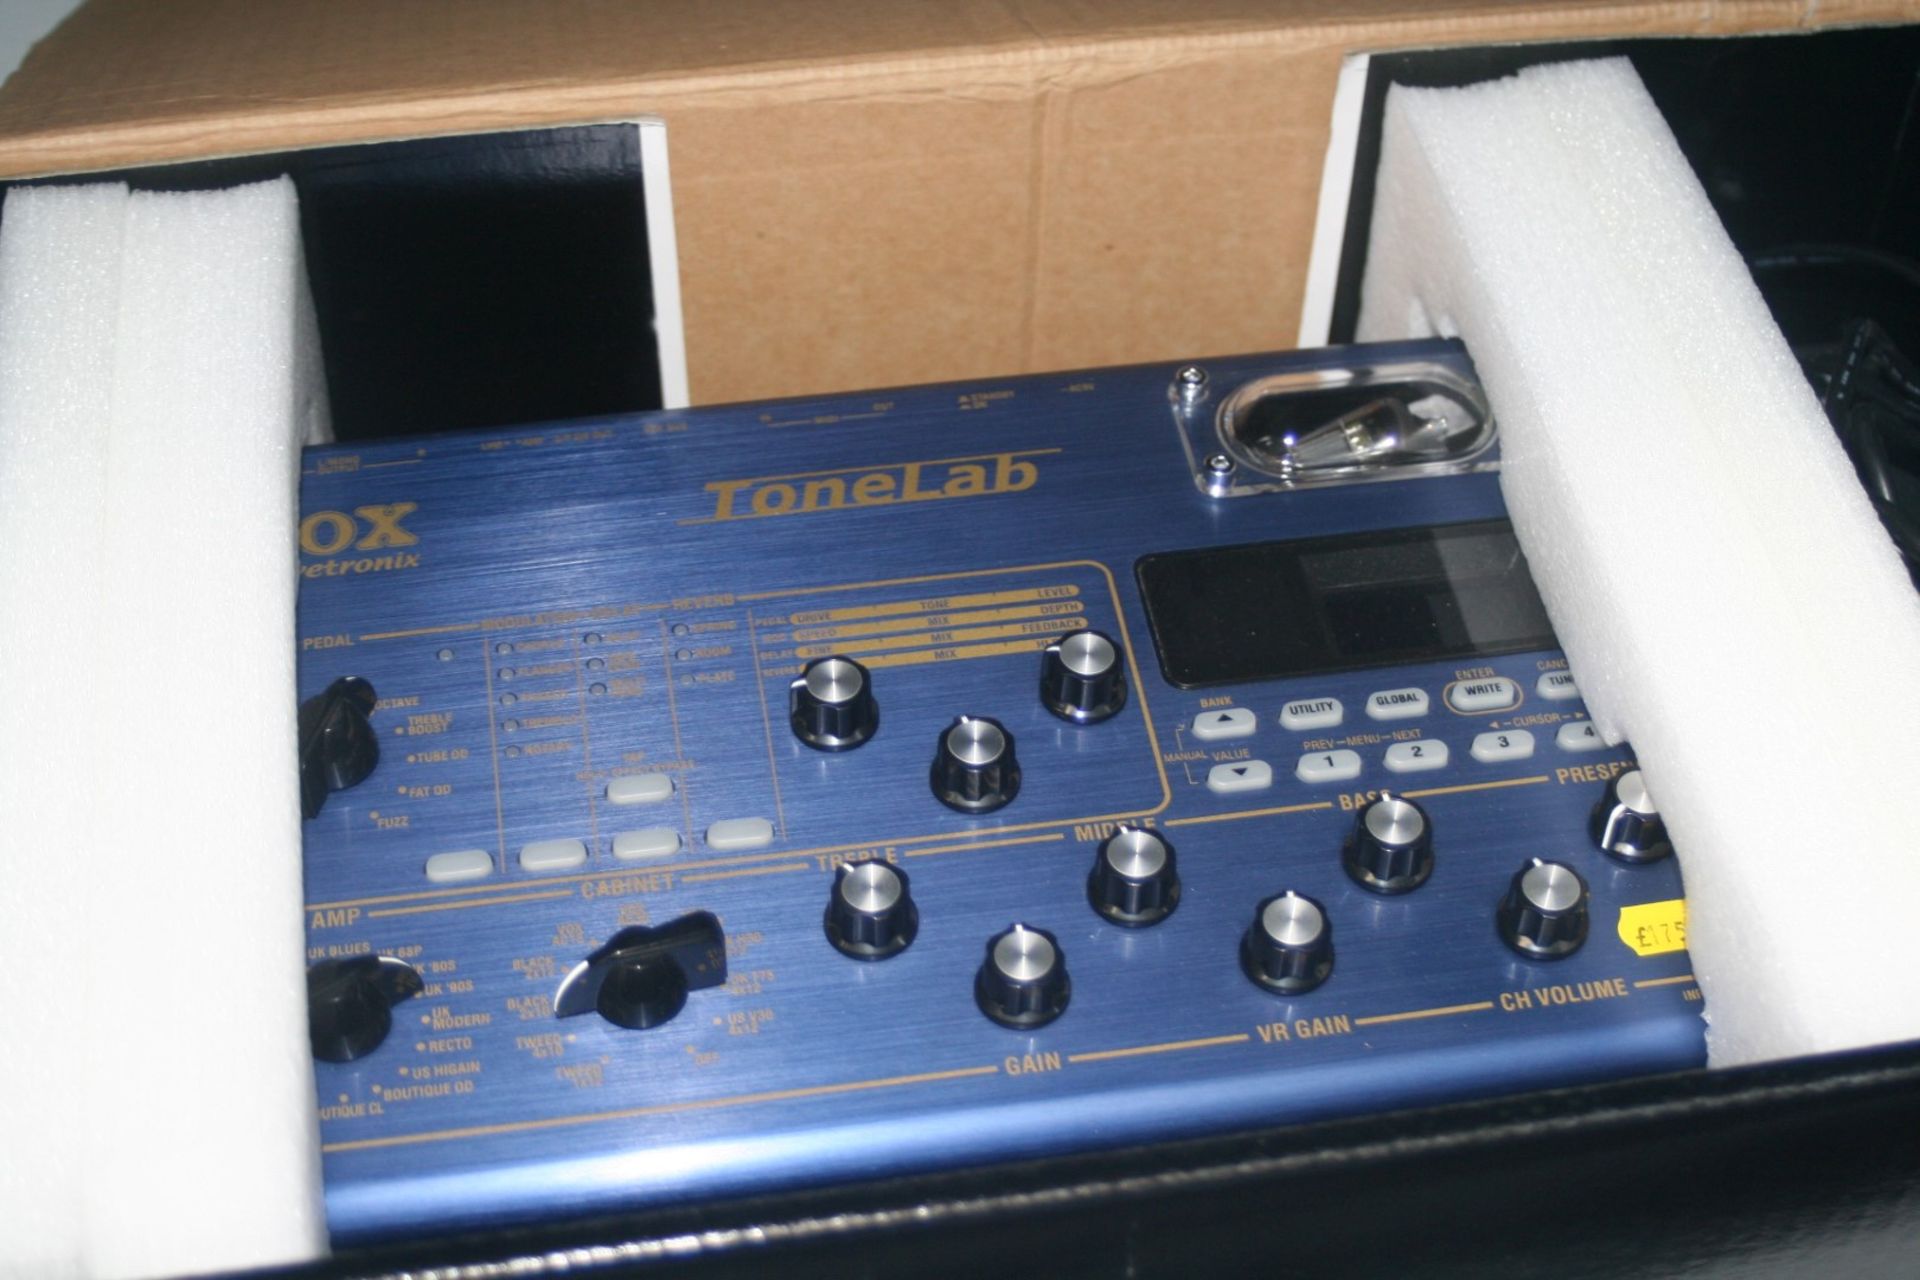 1 x Vox Valvetronix Tone Lab Guitar Amp Modelling Effects Unit – Ex Display Model – Boxed – Comes - Image 15 of 15